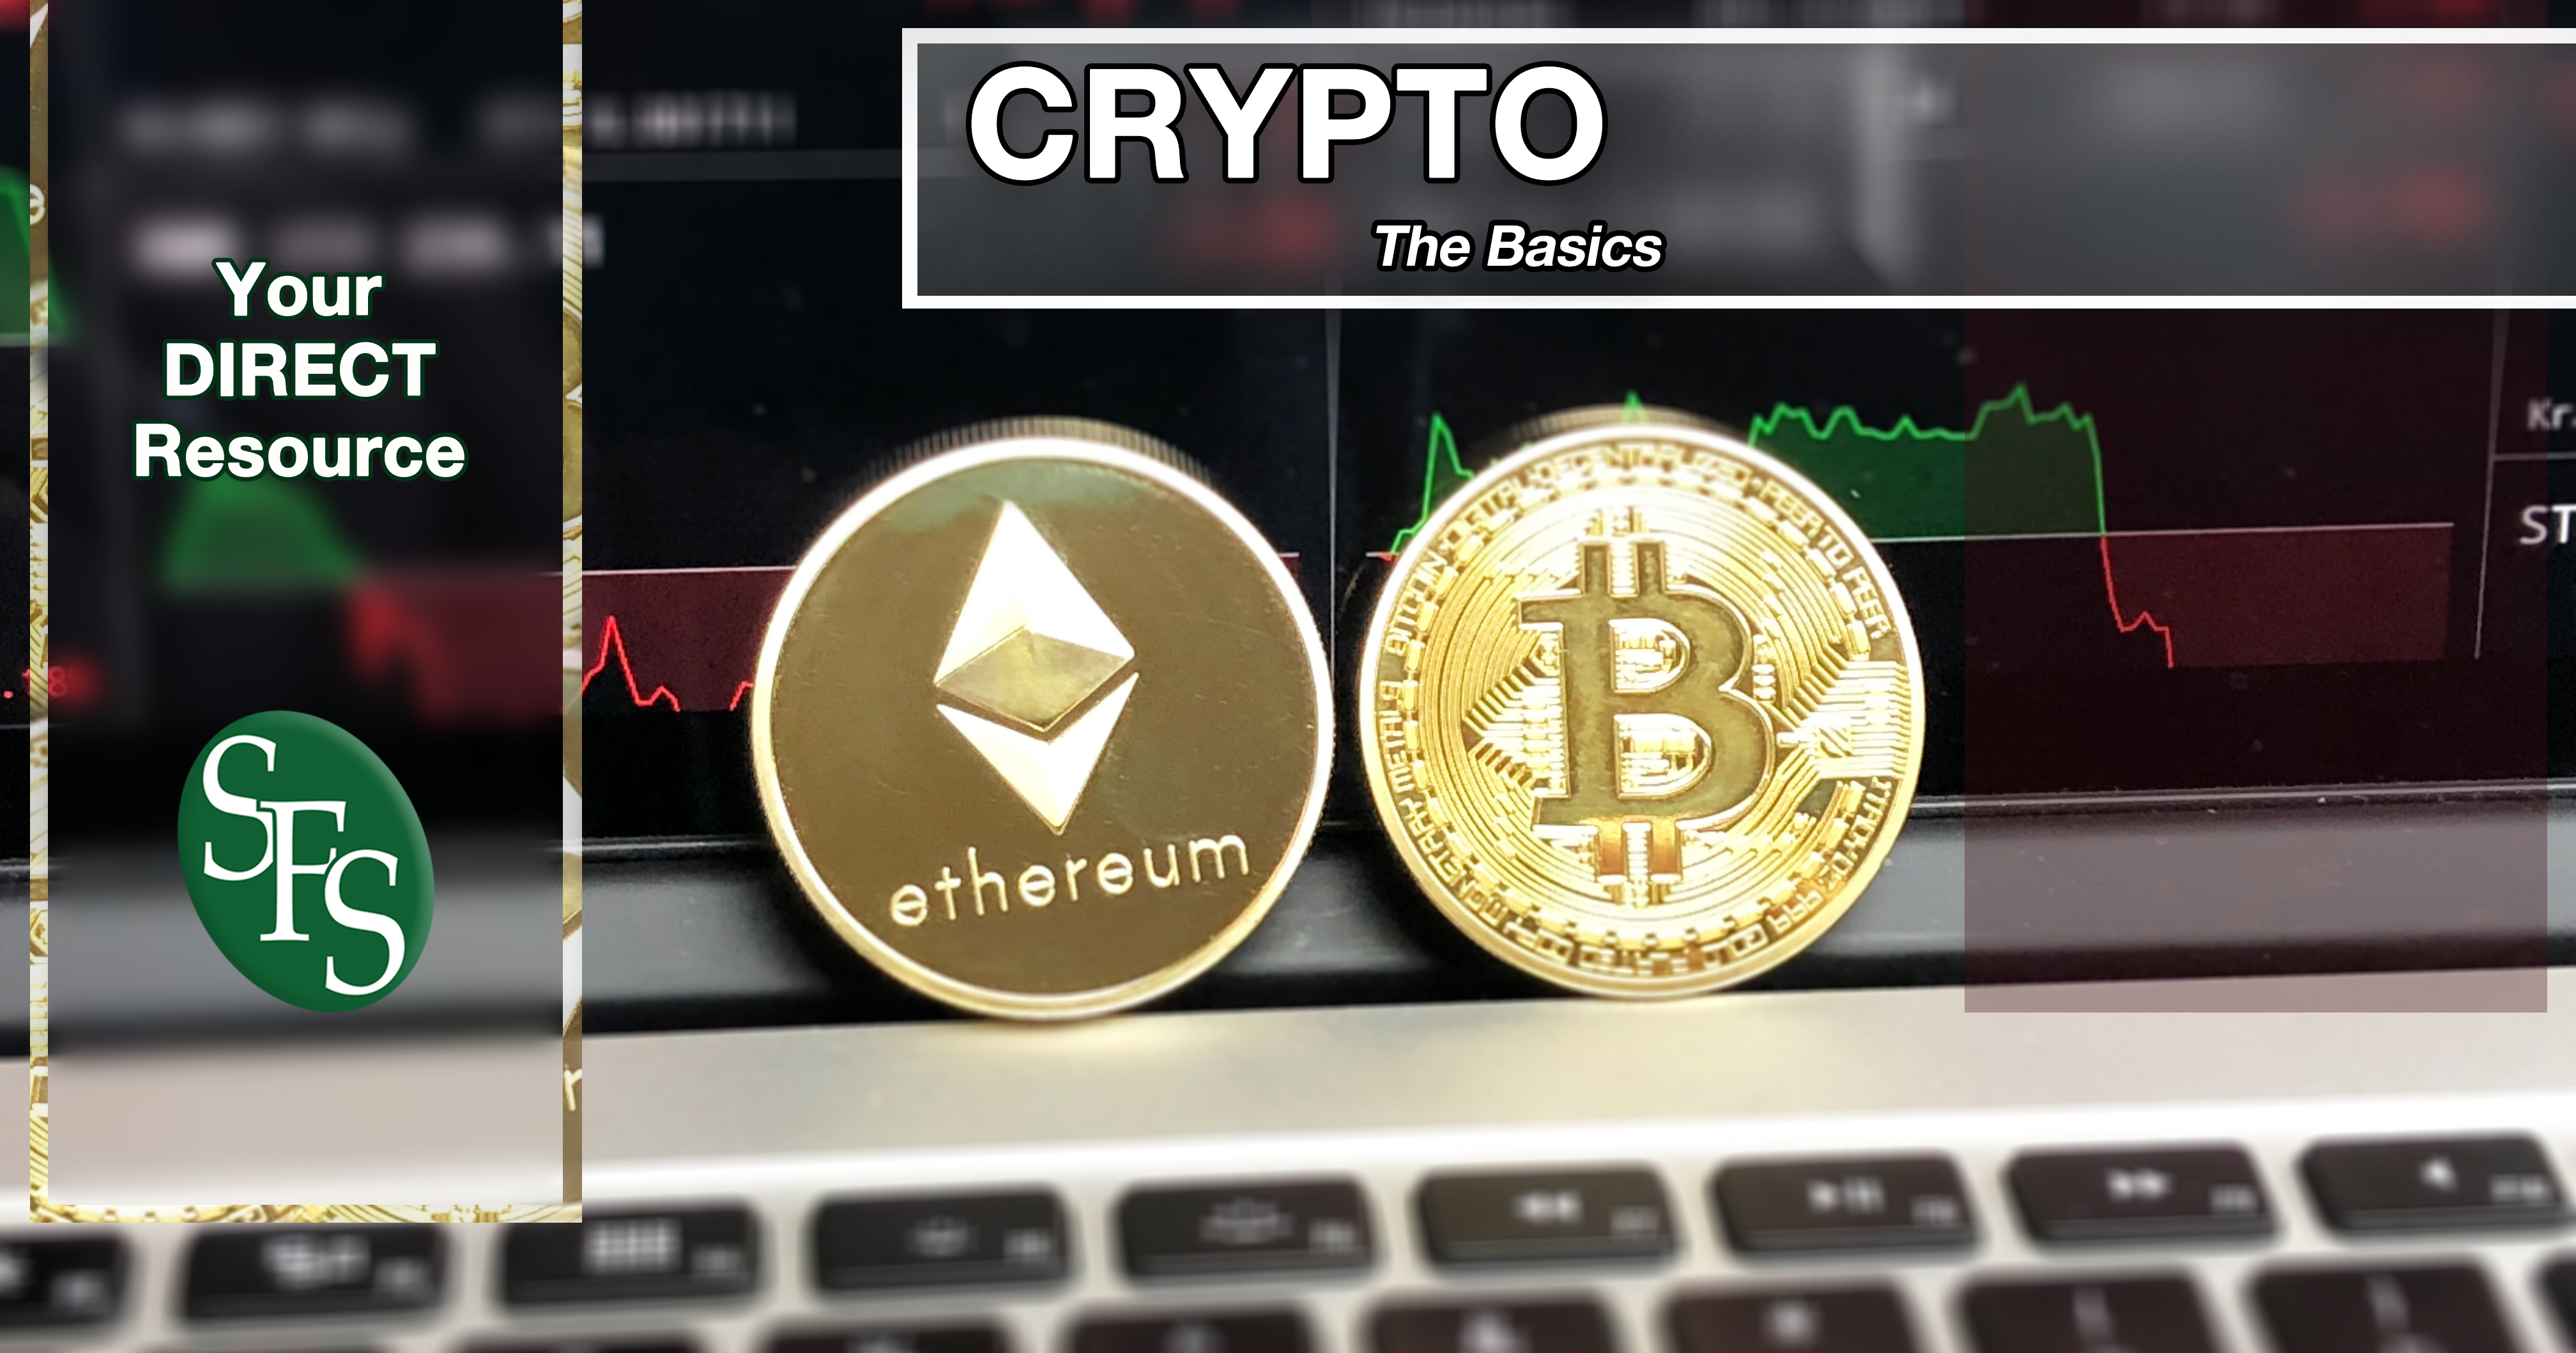 crypto currency is based on which technology